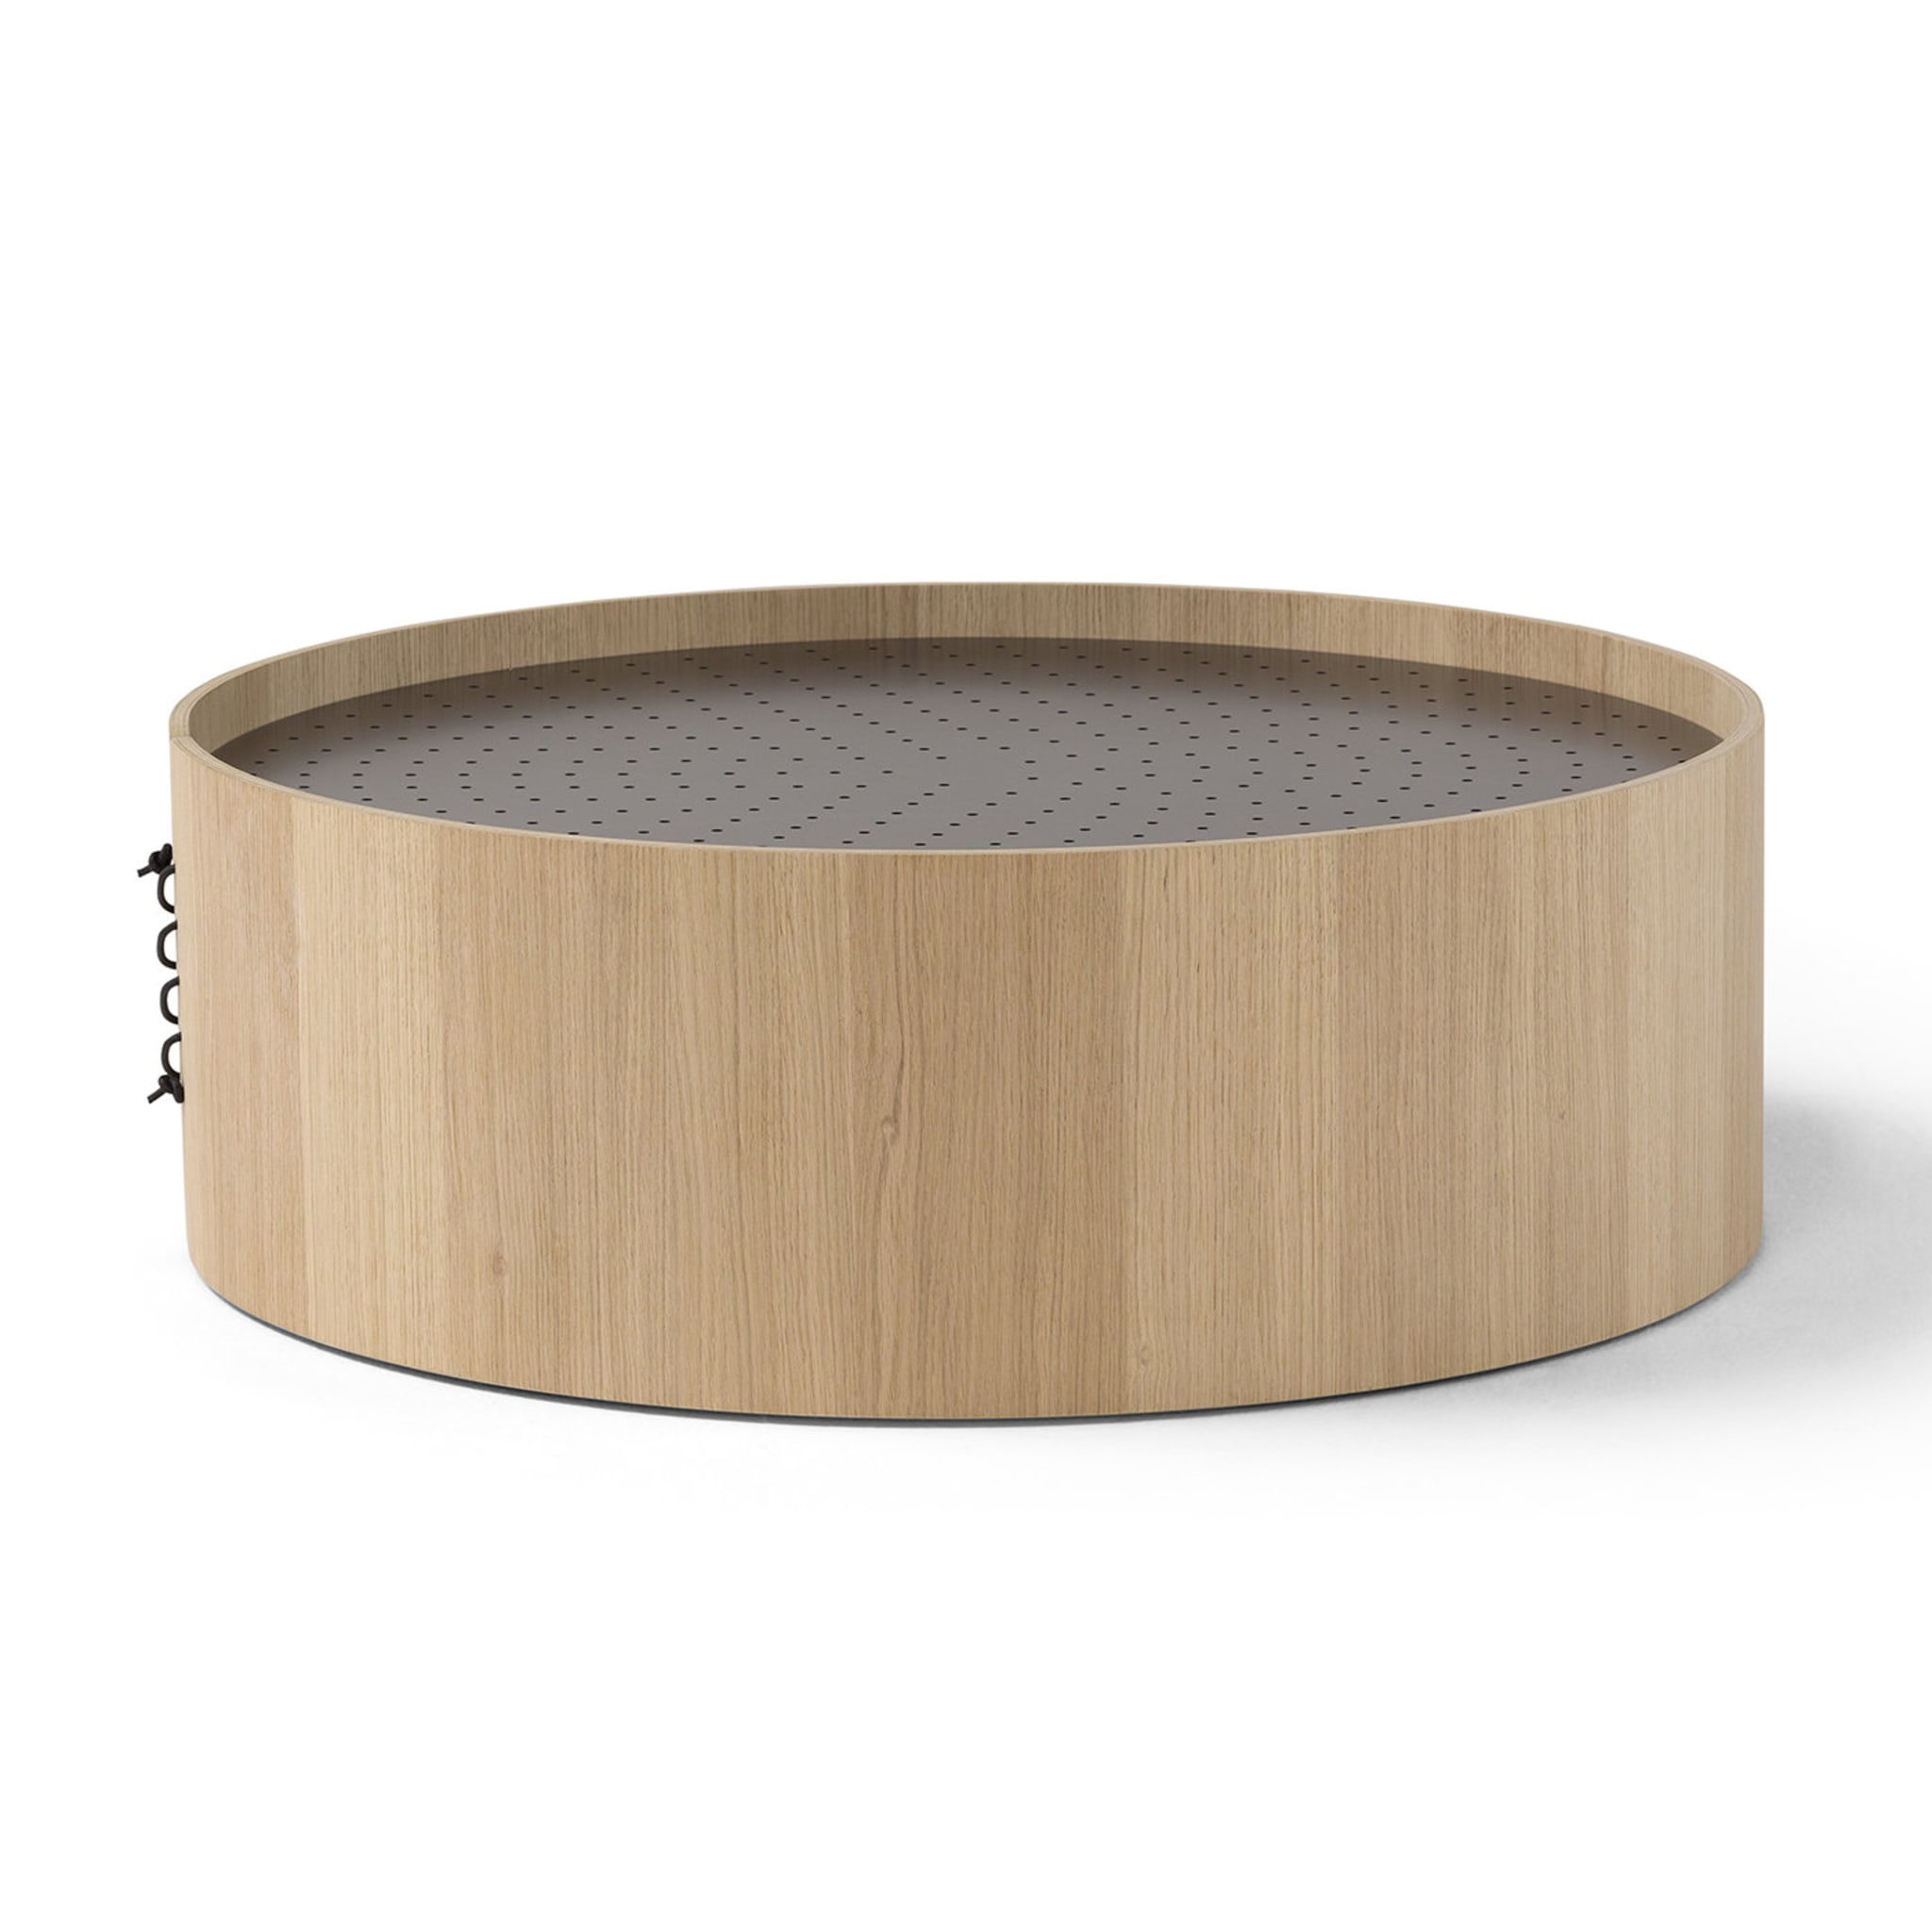 Setacci Coffee Table with Leather Top - Alternative view 2